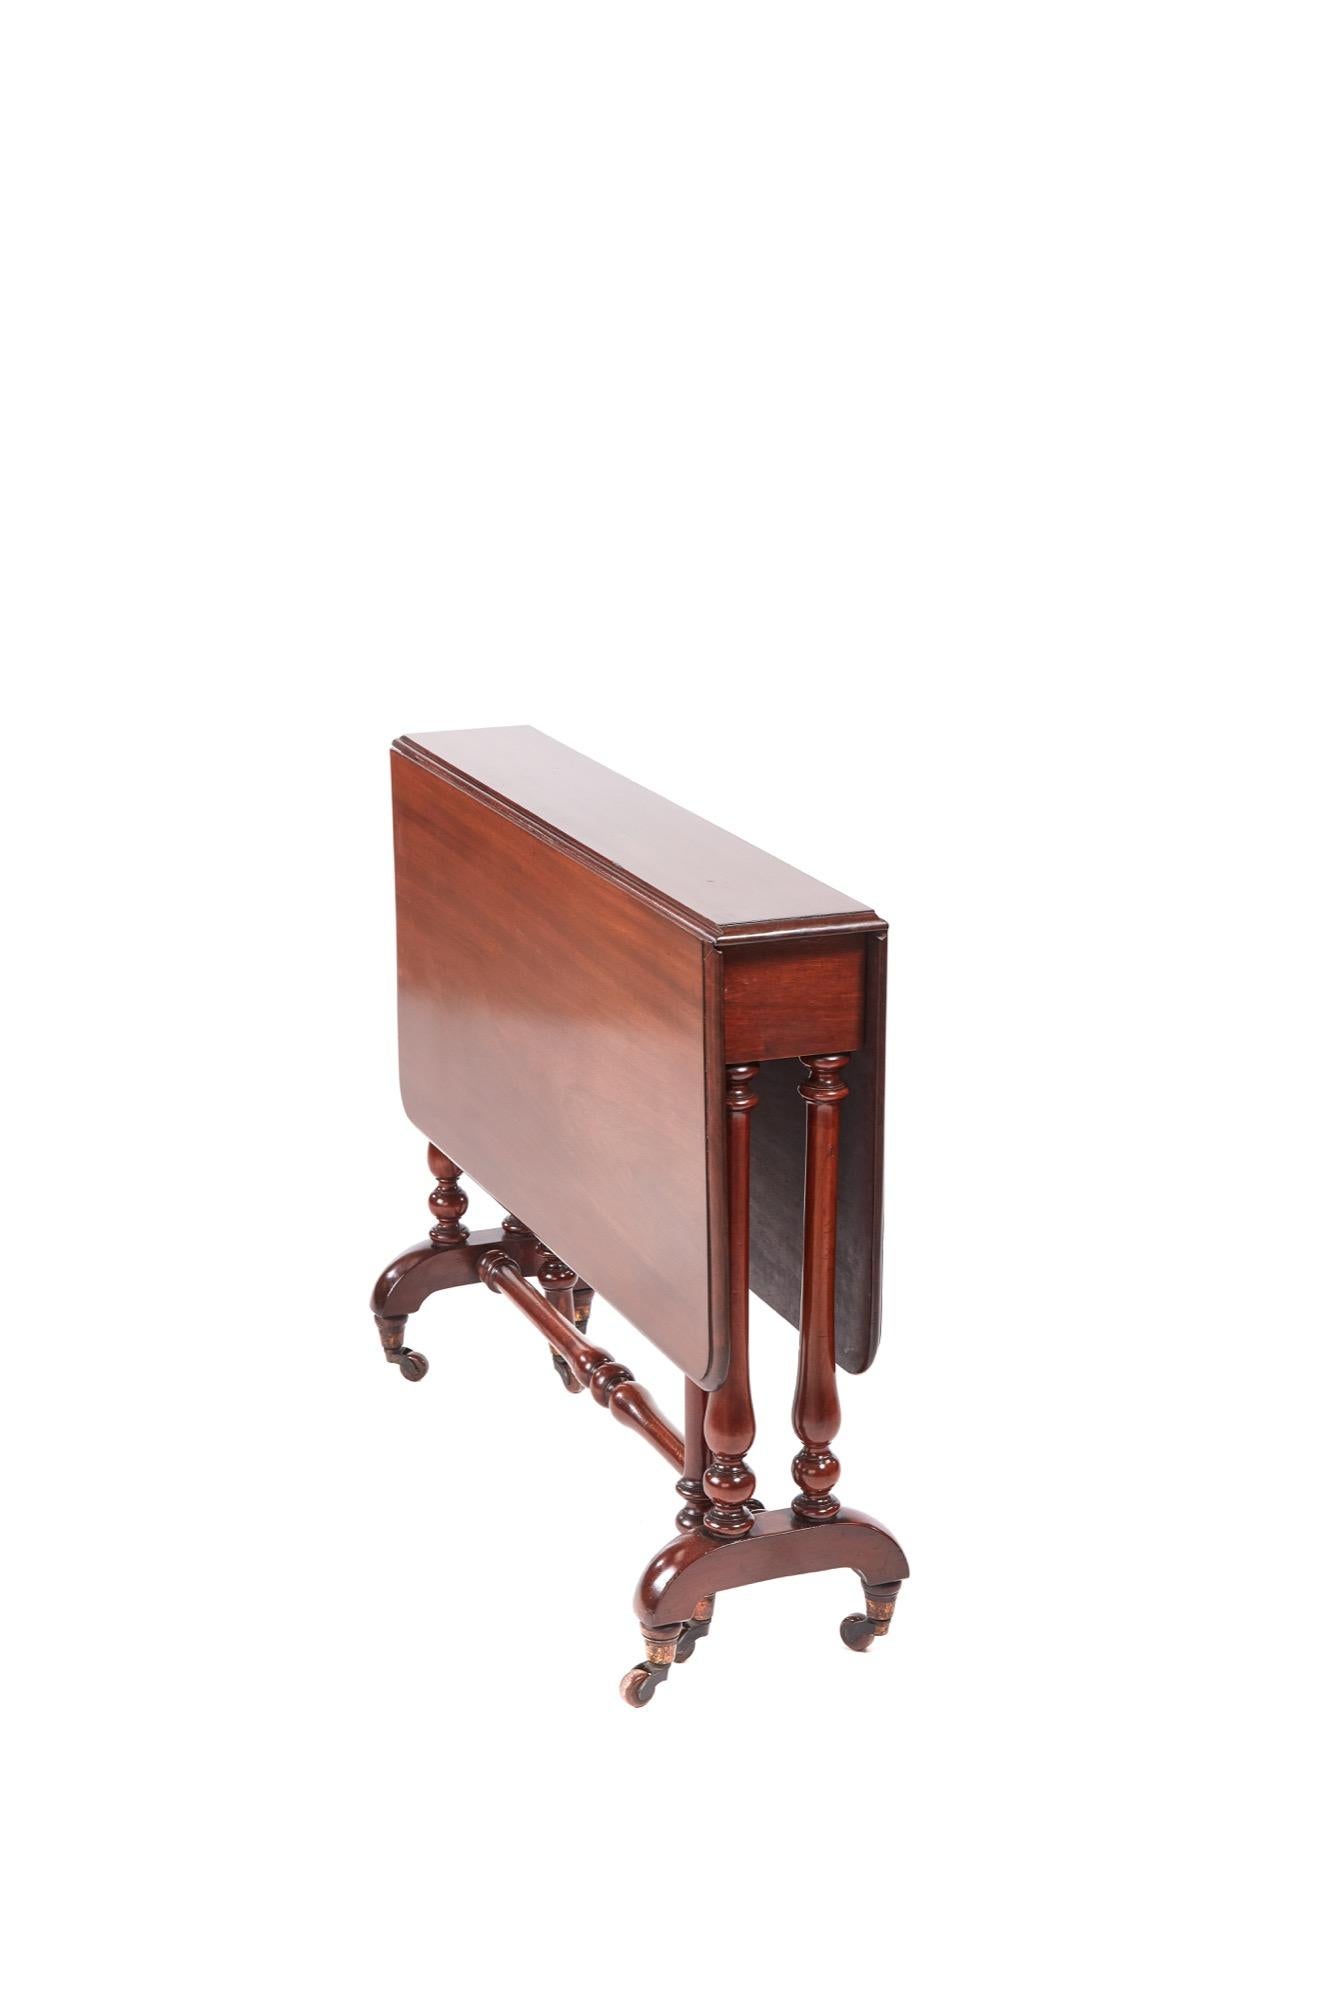 This is a quality Victorian antique mahogany Sutherland table with a lovely mahogany top and thumb moulded edge, two drop leaves supported by turned shaped column ends, turned swing out legs, unusual shaped feet united by a turned stretcher,